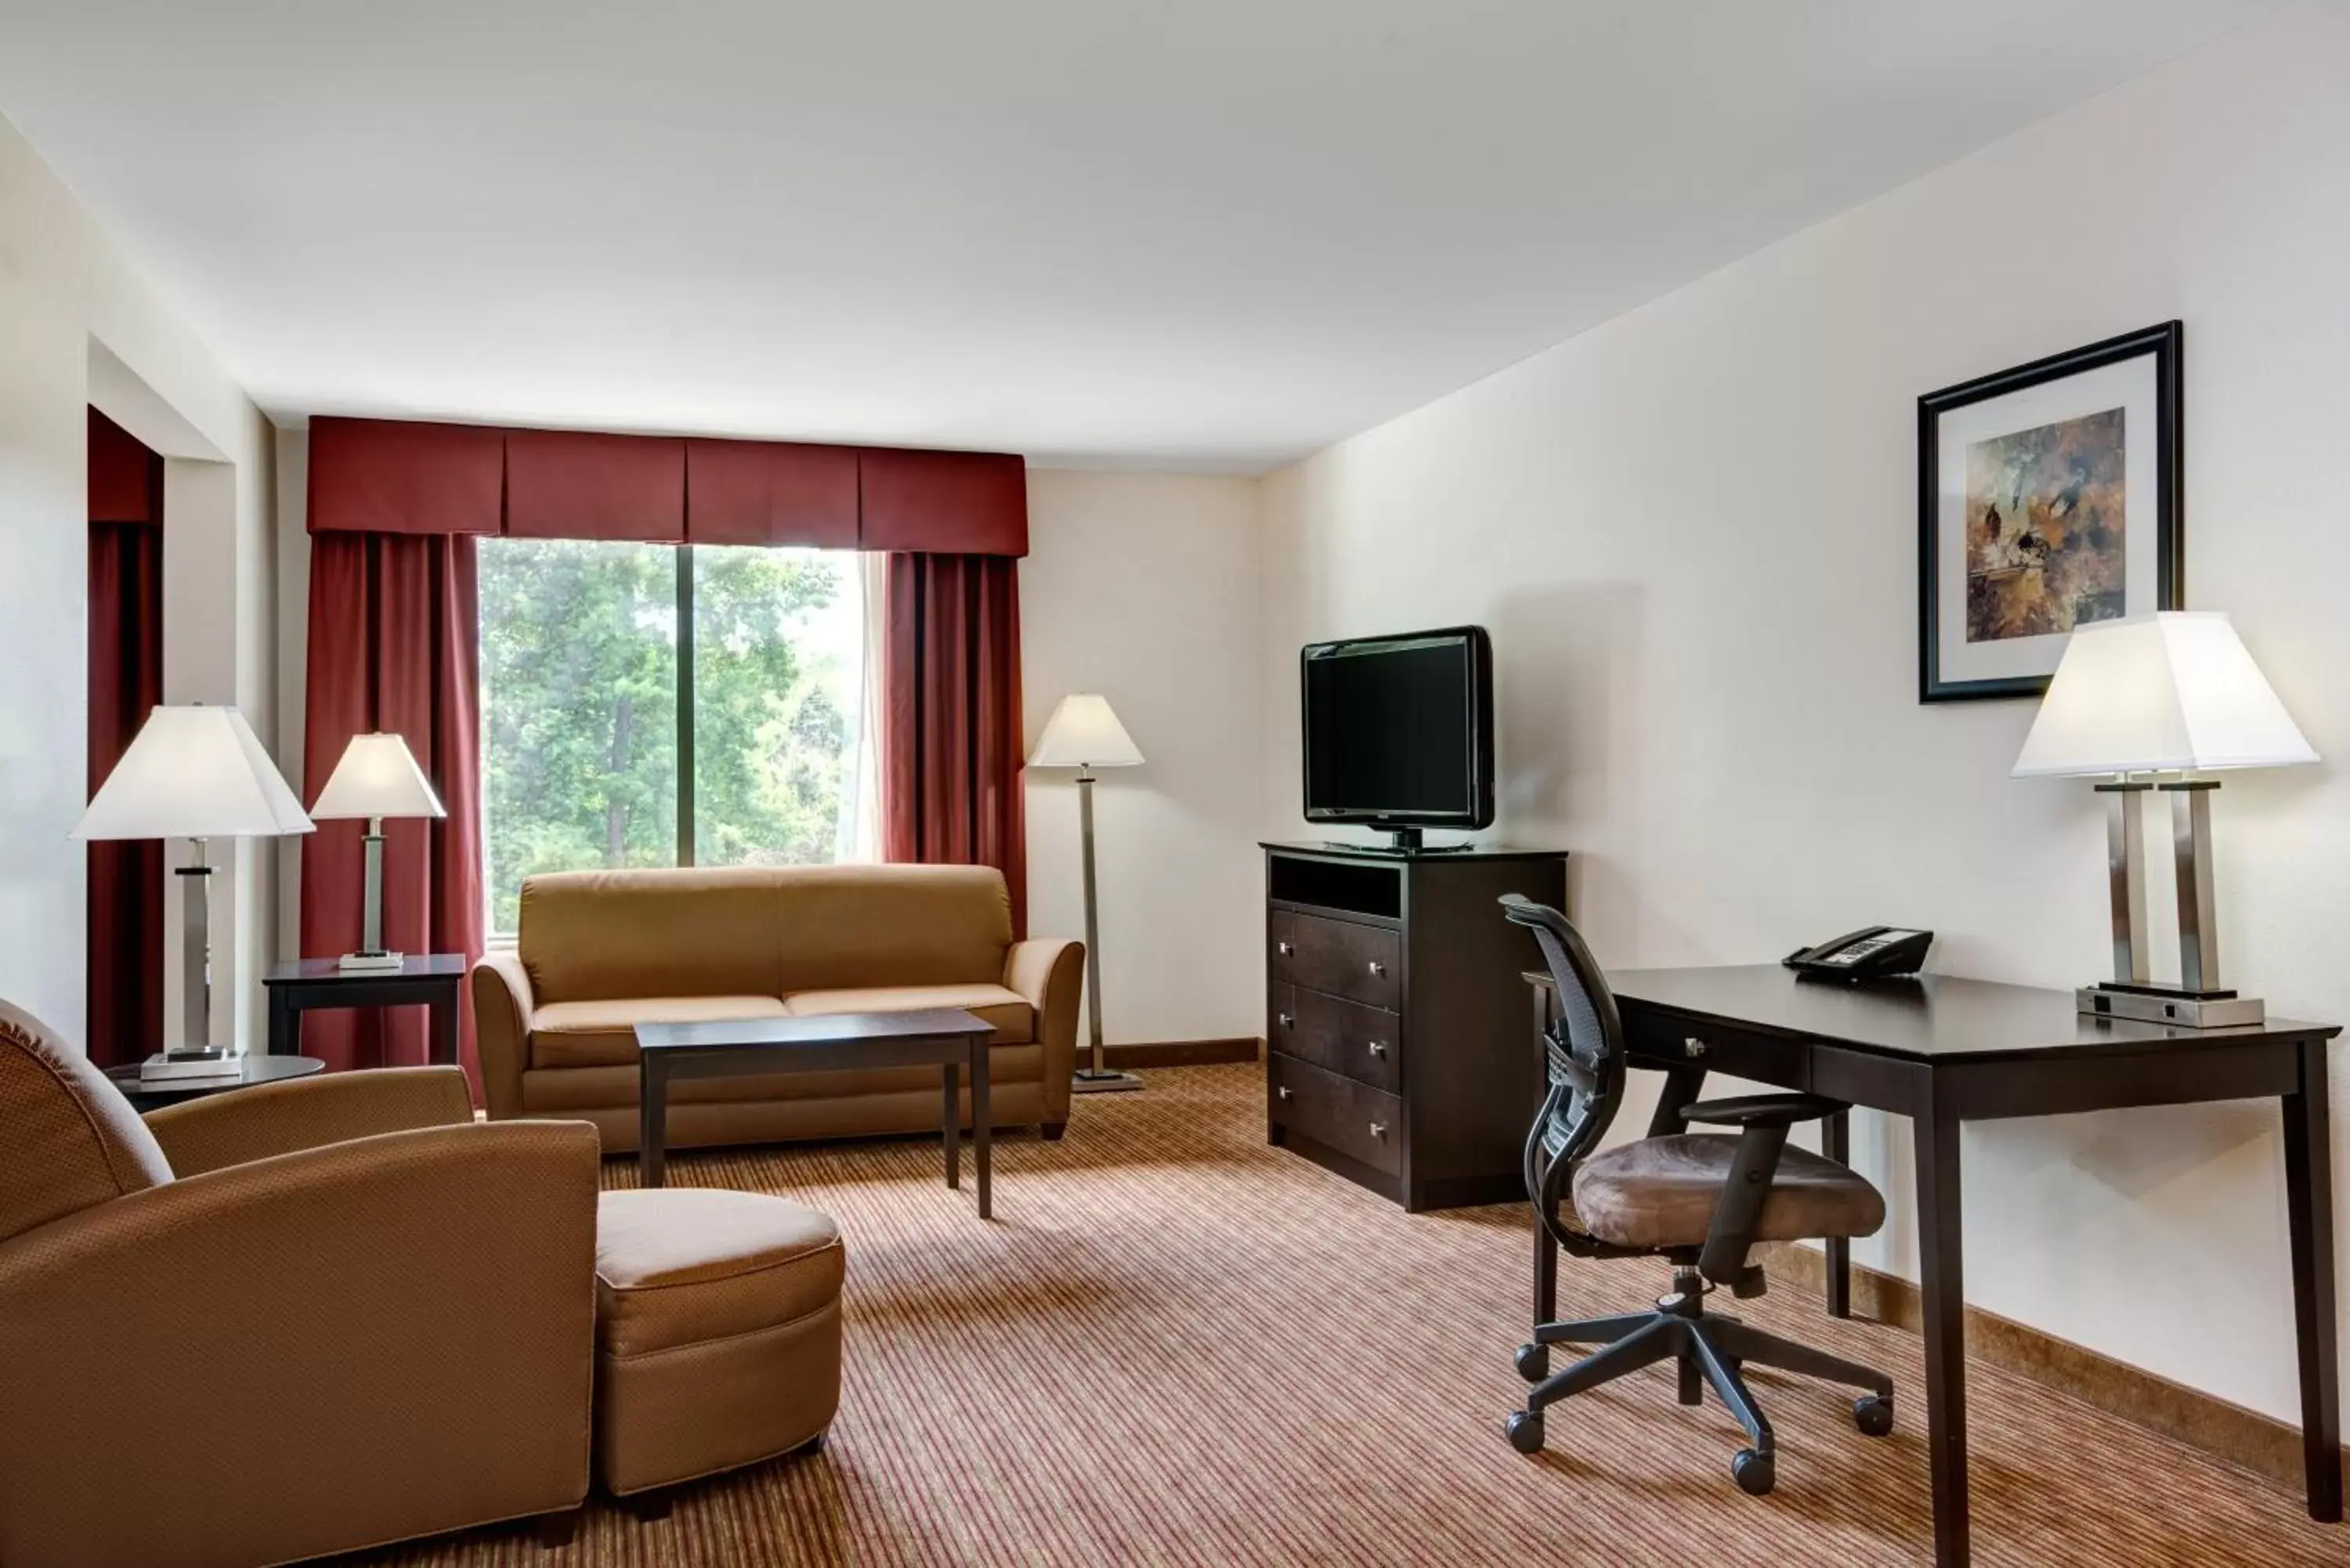 King Studio Suite - Non-Smoking in Wingate by Wyndham State Arena Raleigh/Cary Hotel